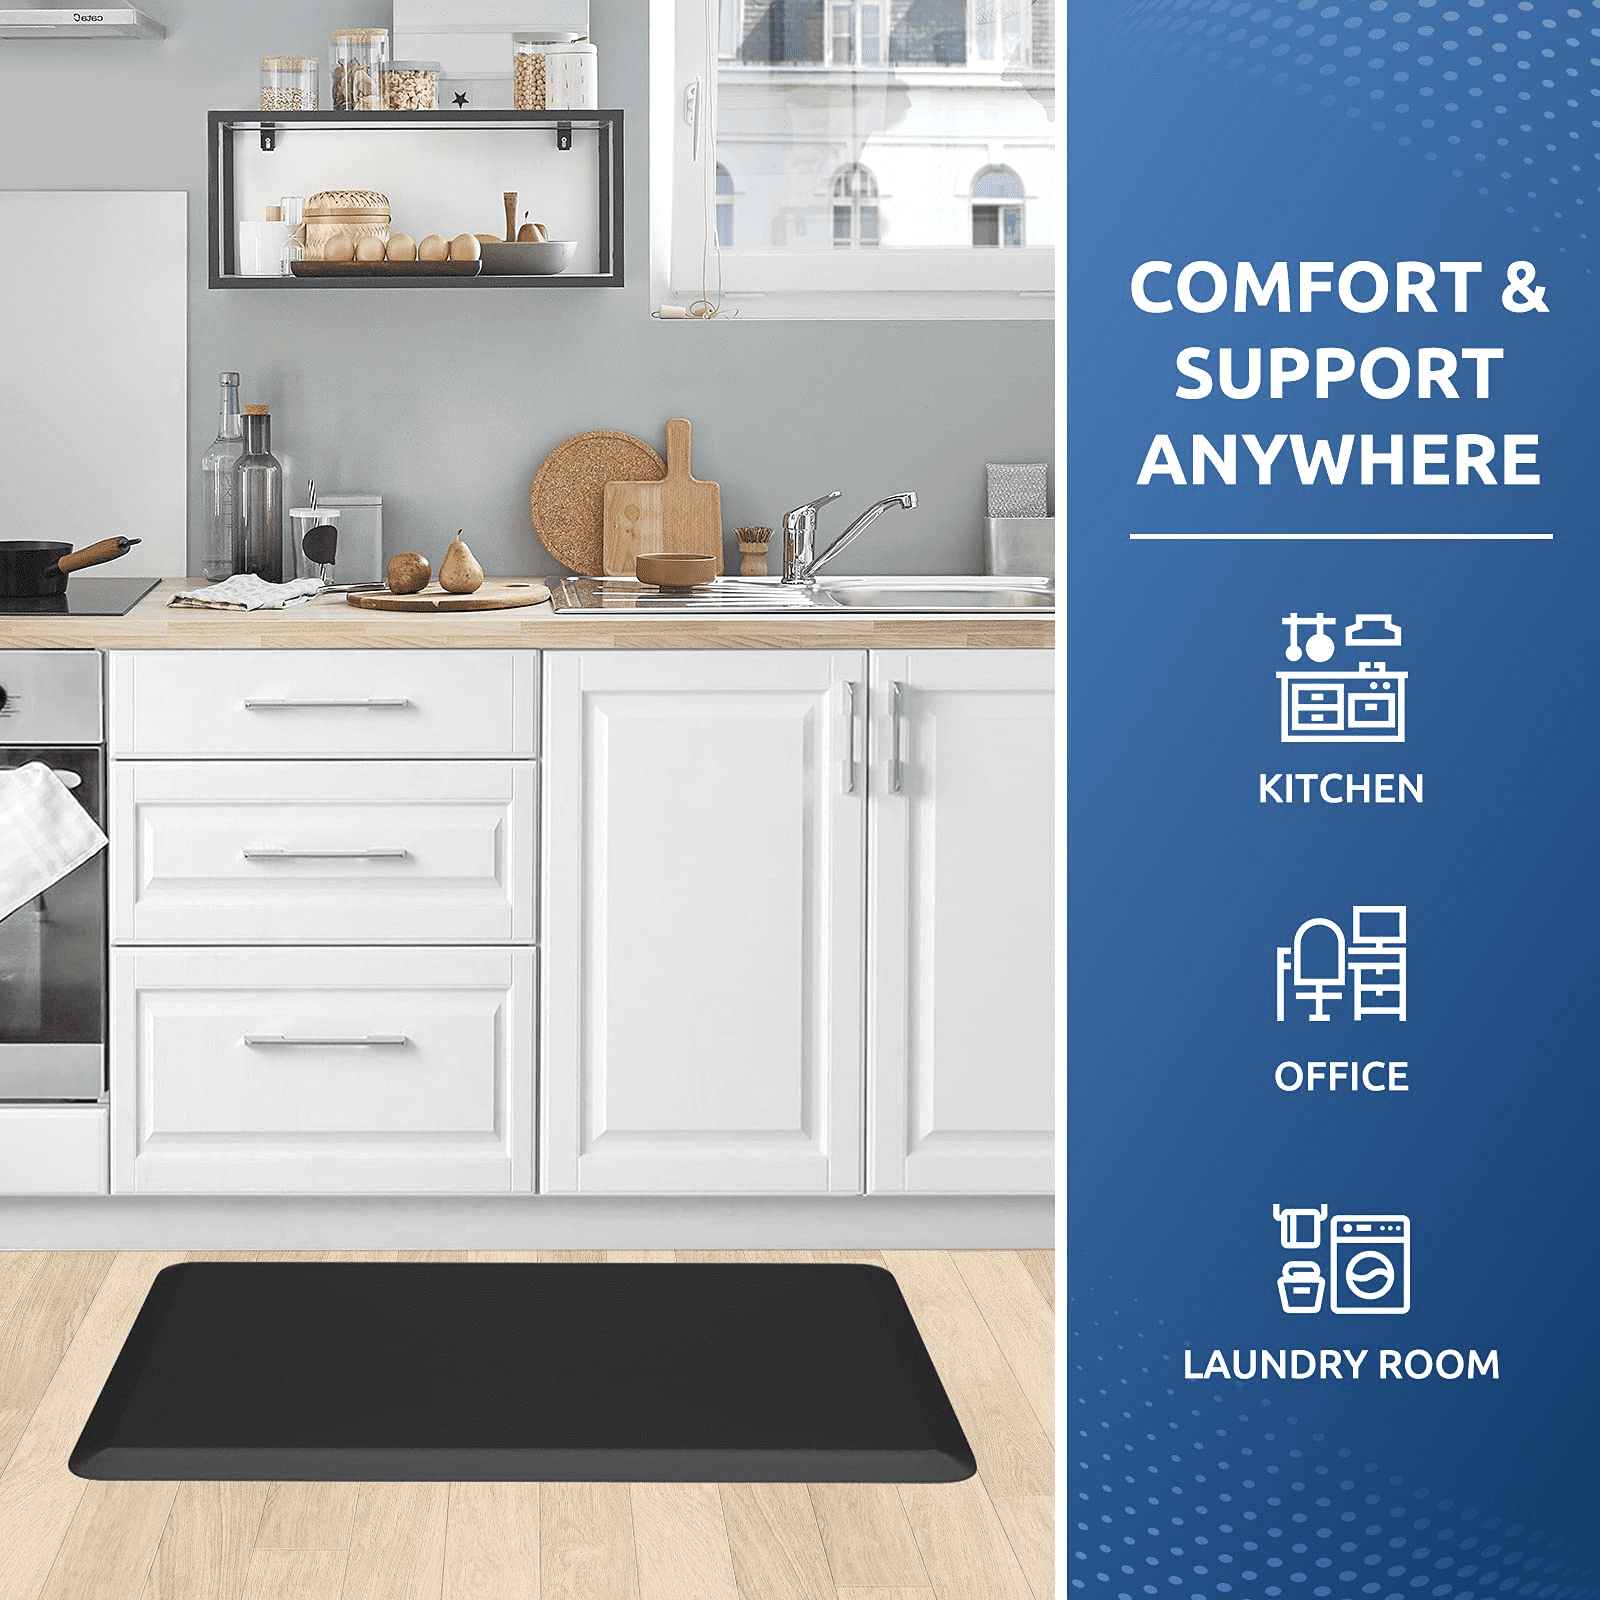 GMMGLT Kitchen Mat Cushioned Anti-Fatigue Kitchen Rug, Non-Slip Kitchen Mats and Rugs Comfort Foam Rug for Kitchen, Floor Home, Office, Sink, Laundry - 15.8